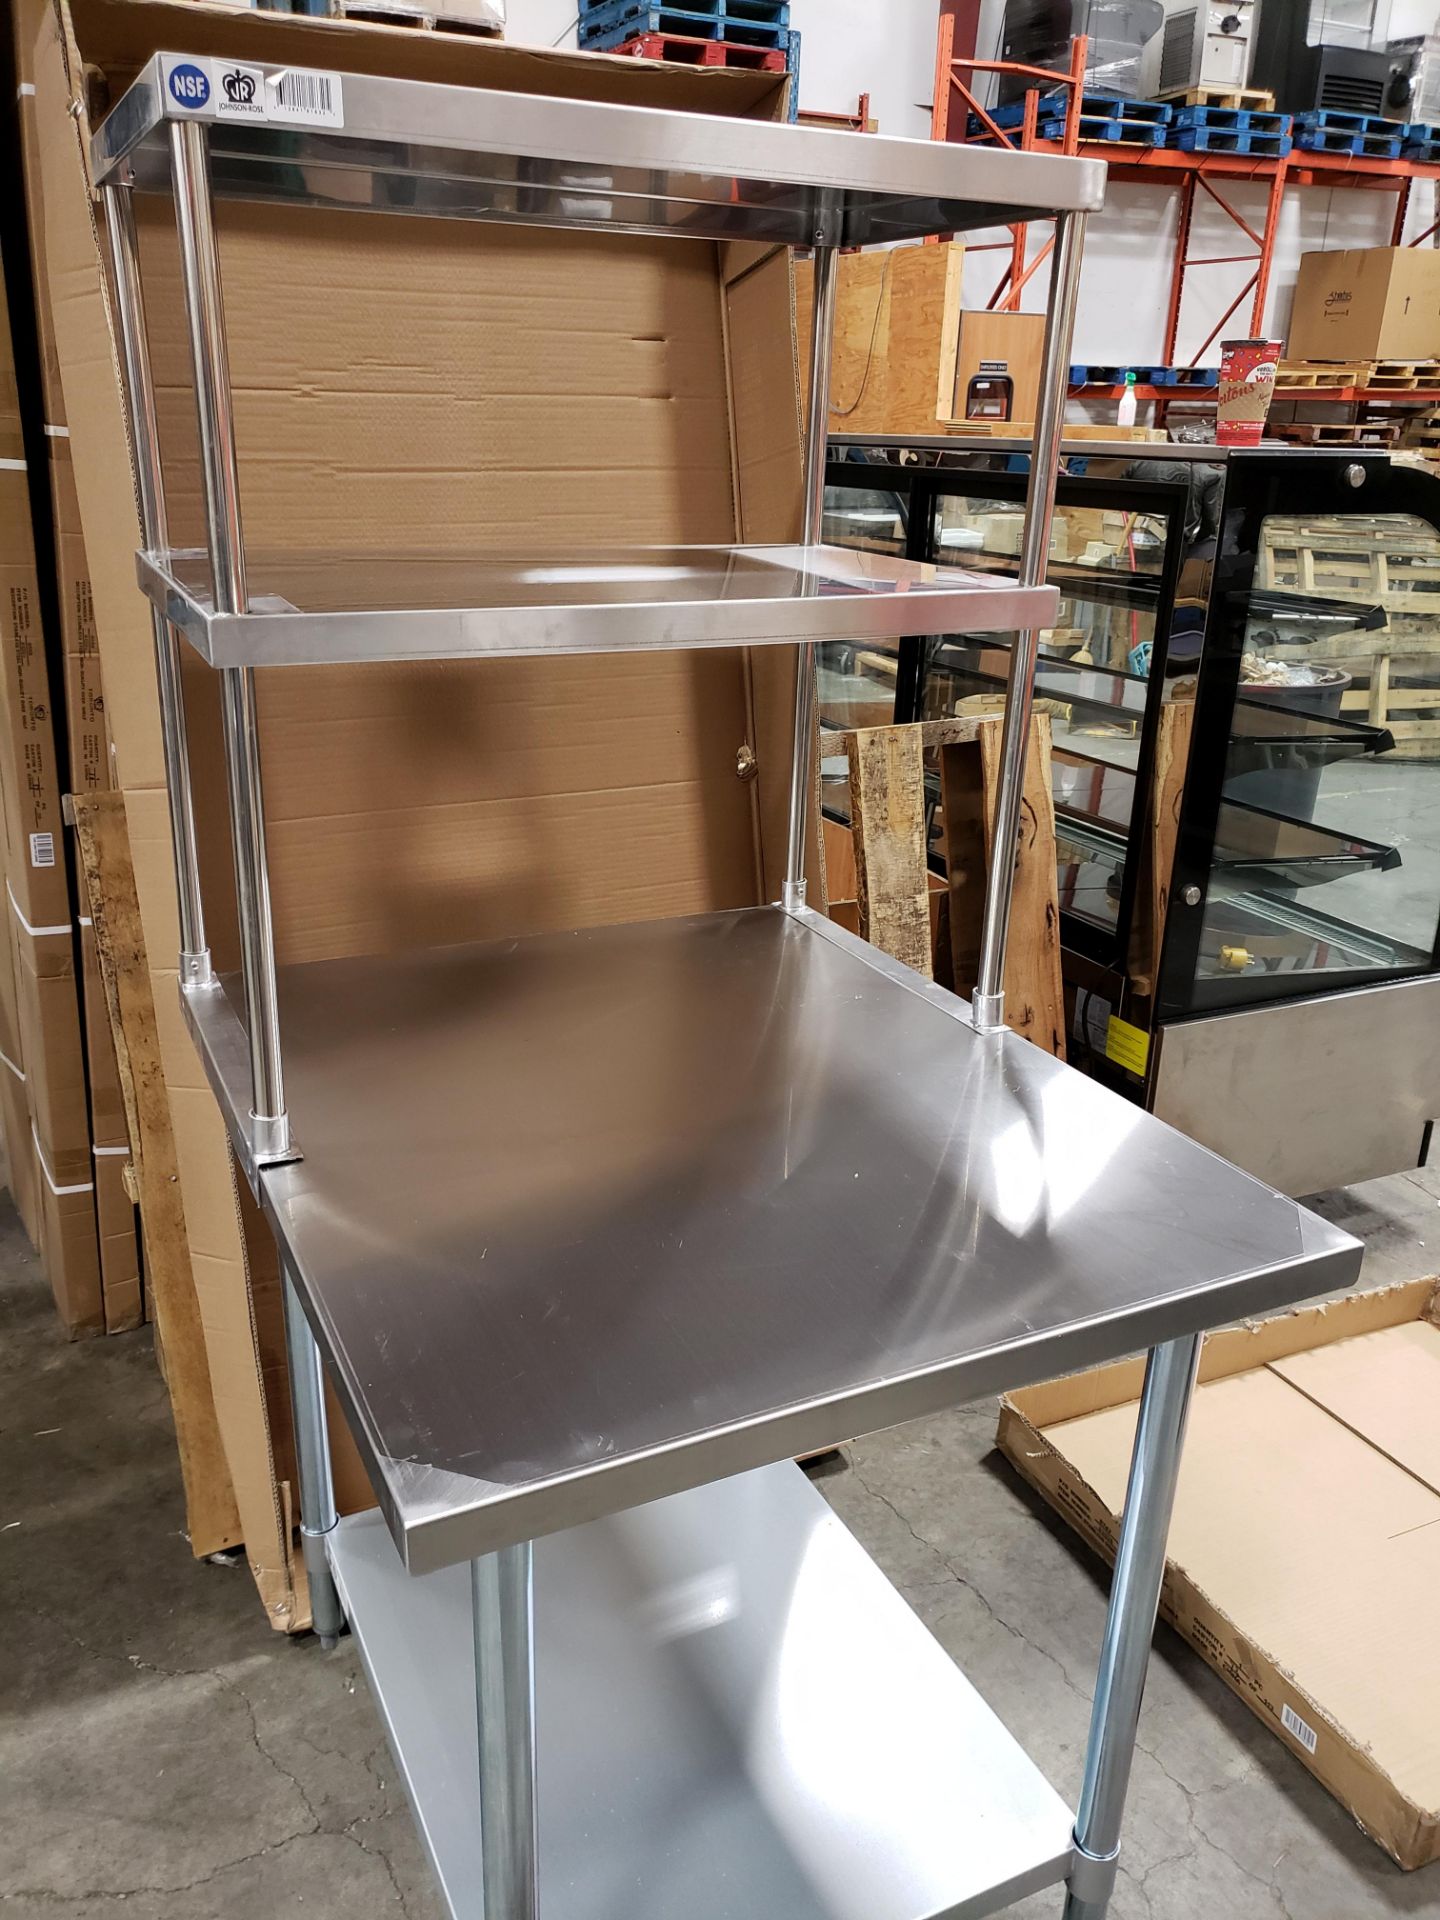 36" x 30" Stainless Table with 18" x 30" Double Overshelves